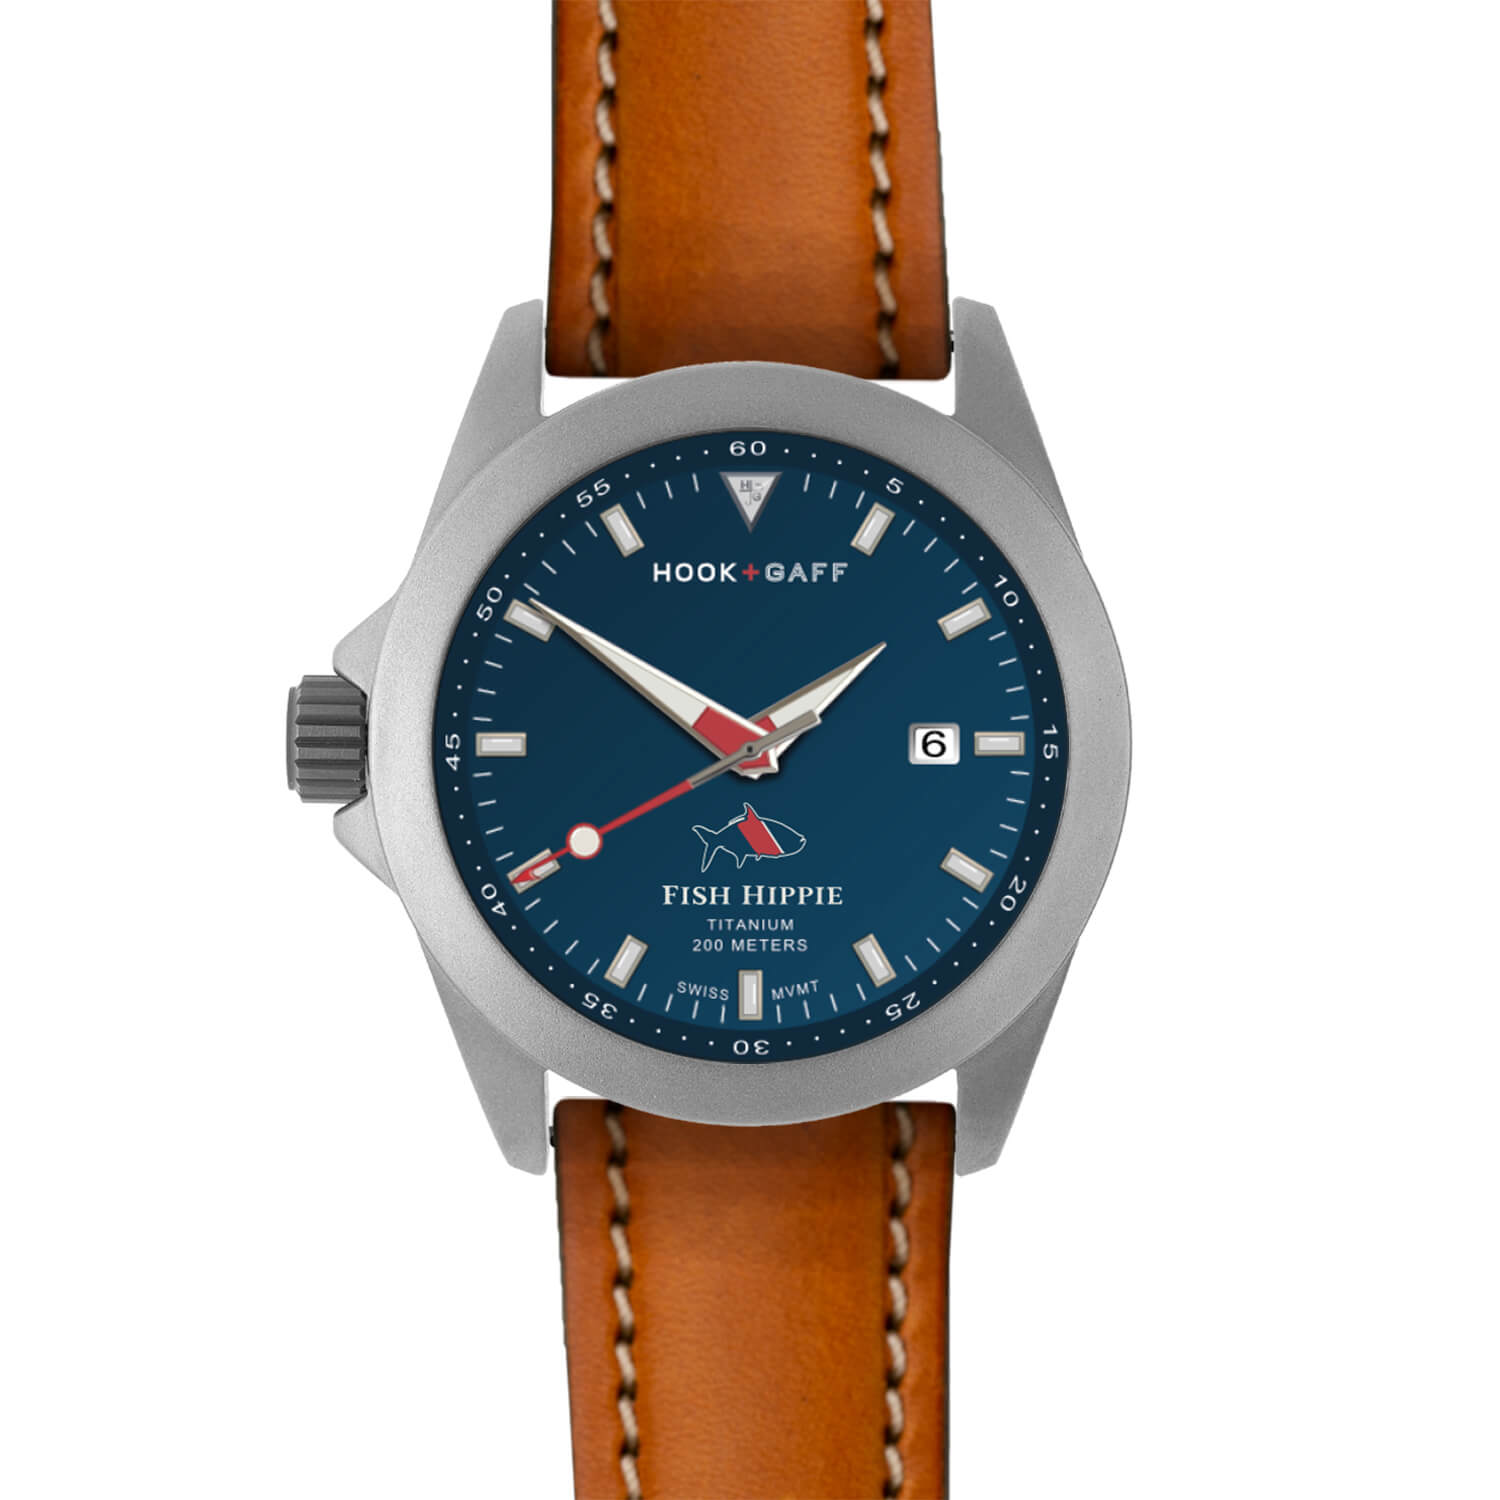 Fish Hippie FH Edition Hook+Gaff Sportfisher Watch - Navy Dial Cognac Leather Strap / Os